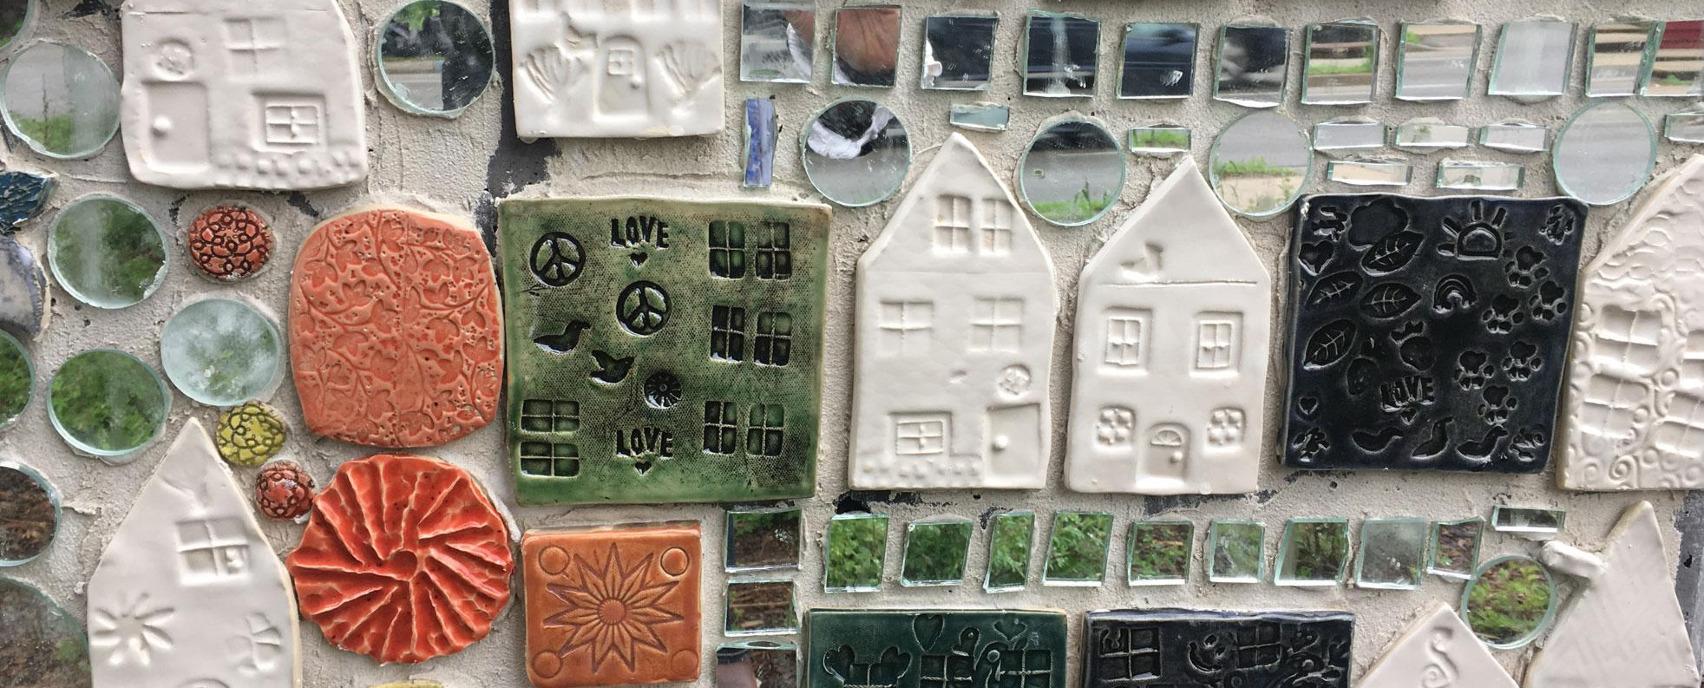 Close up of various tiles used to construct the Gateway Mosaic located in Old East Village, London, Ontario